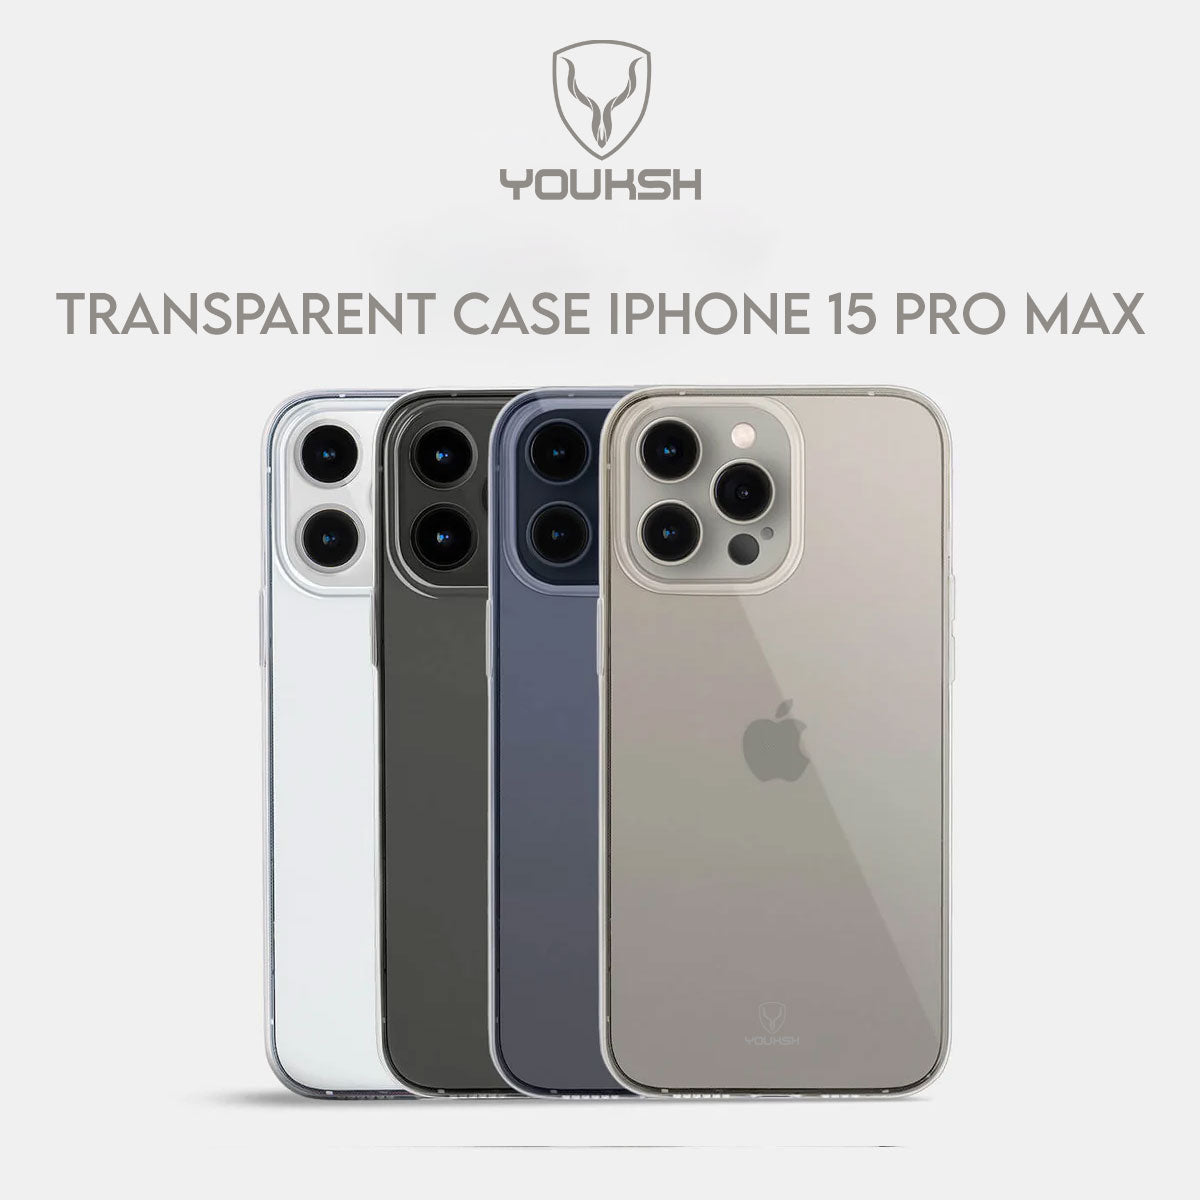 YOUSKH APPLE IPHONE 15 PRO MAX (6.7) TRANSPARENT CASE - YOUKSH APPLE IPHONE 15 PRO MAX (6.7) TRANSPARENT COVER - TRANSPARENT SOFT SHOCK PROOF JELLY BACK COVER.